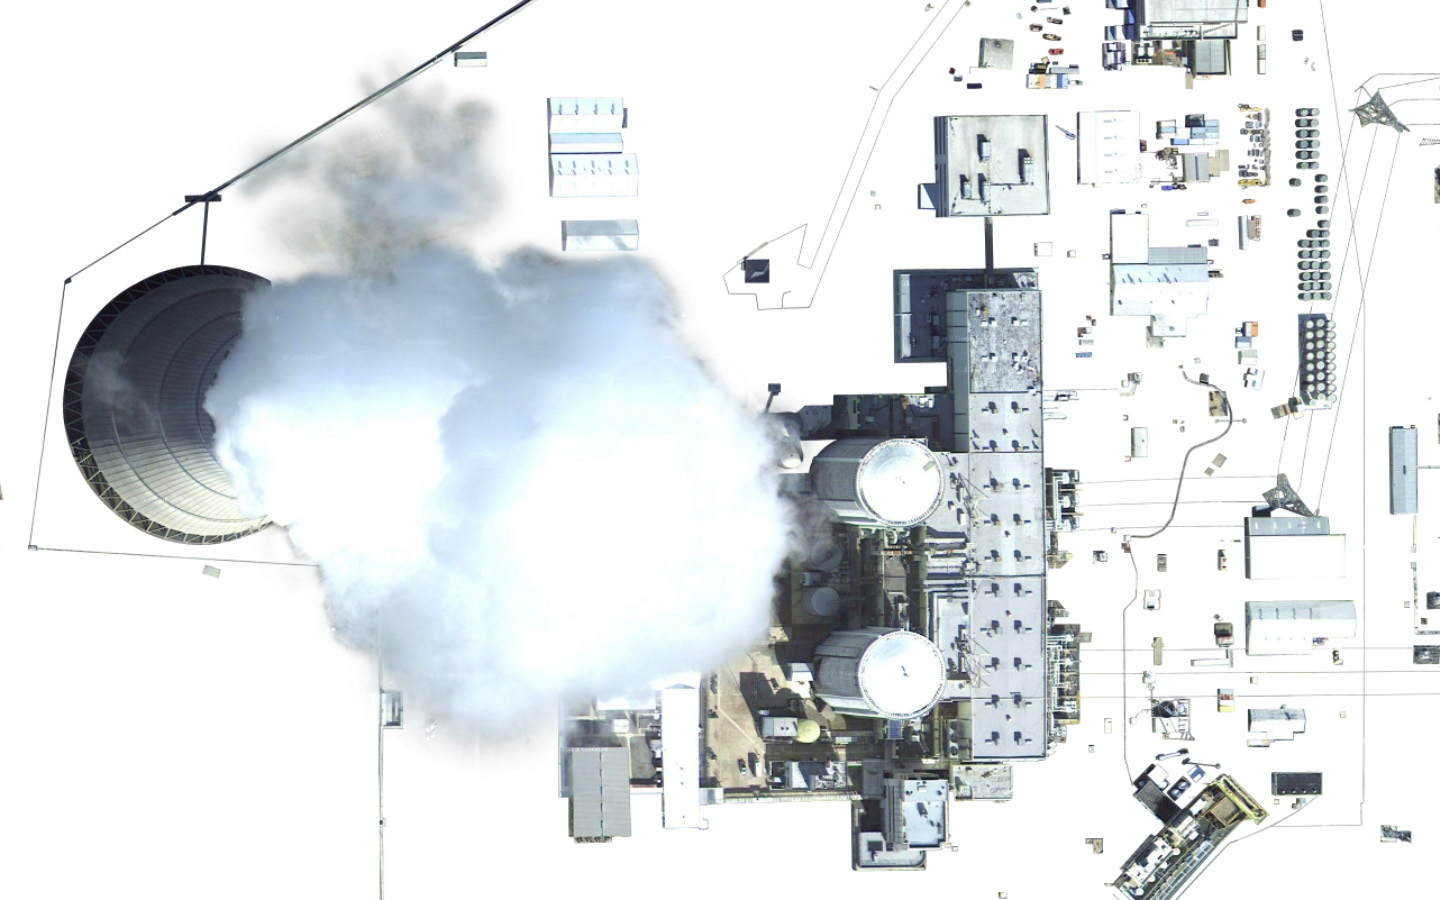 Isolated satellite imagery of a nuclear power plant, showing buildings and steam coming out of a large tower